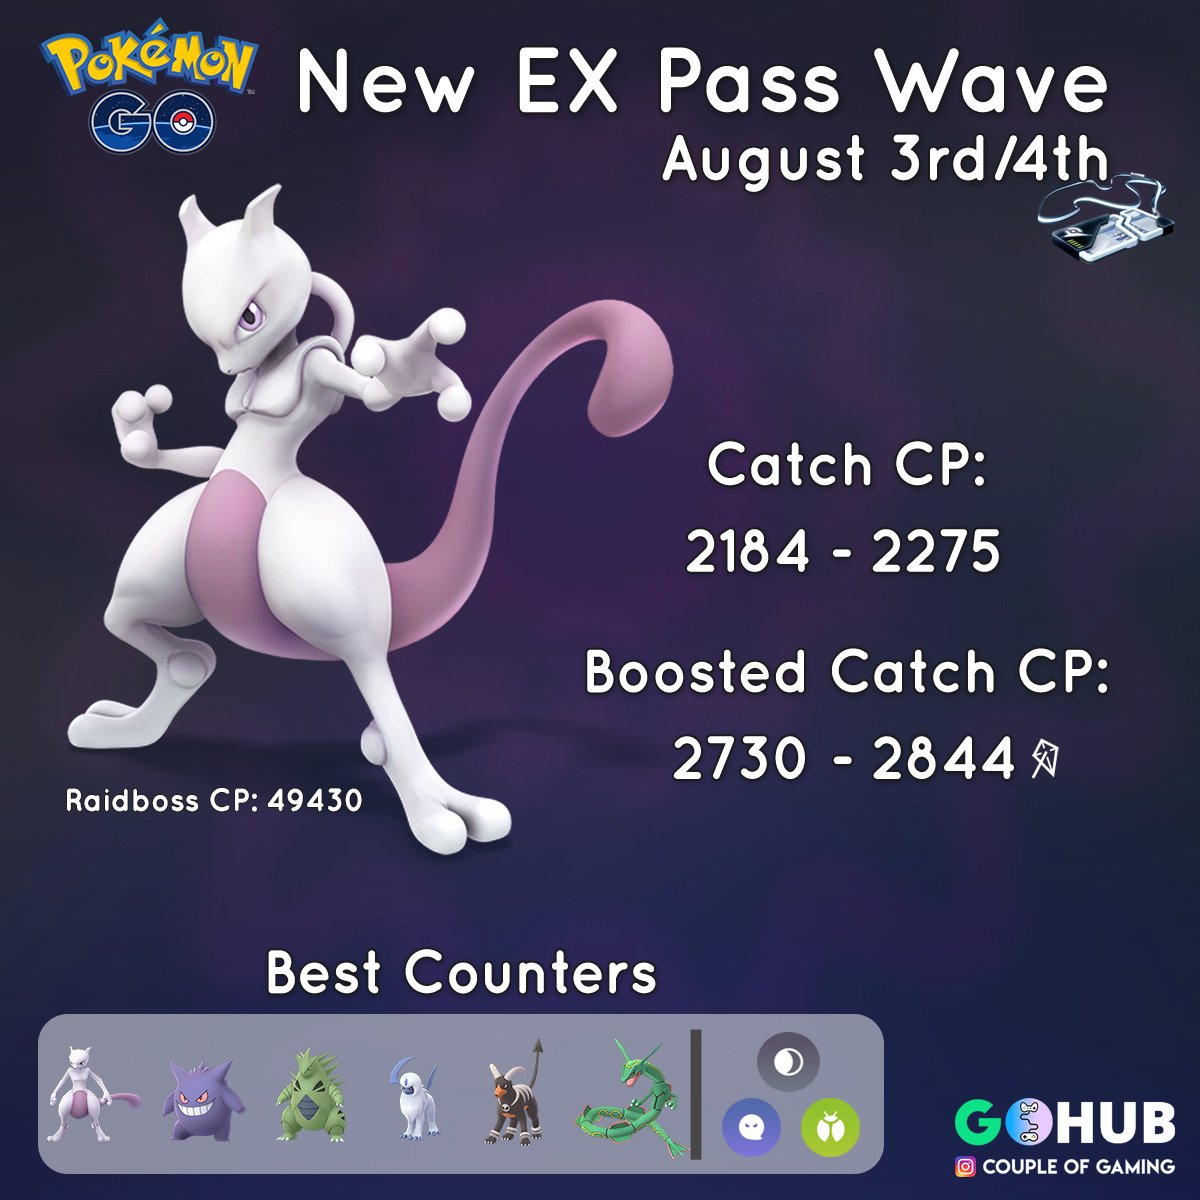 Pokémon GO on Twitter: "Trainers, a new wave of EX Raid passes has gone out! your Mewtwo on August 3/4! Guide: https://t.co/JycUh3Ipyo https://t.co/QxZgNMia9P" / Twitter